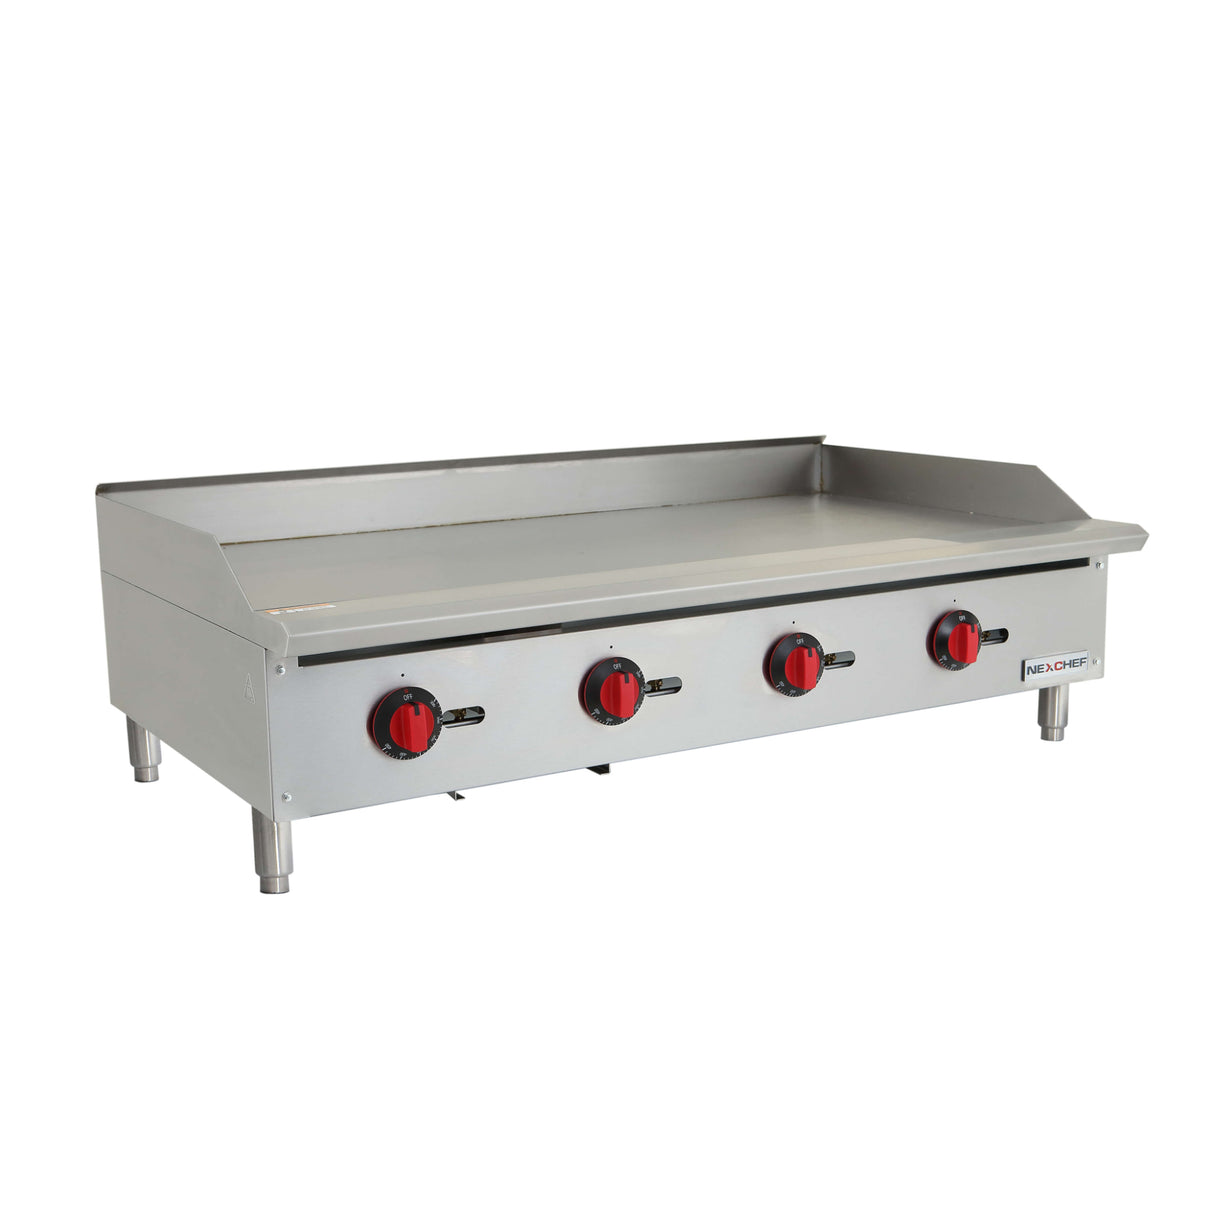 NexChef G48T Commercial 48" Countertop Griddle with Thermostatic Controls, (4) High Performance Stainless Burners - 120,000 BTU